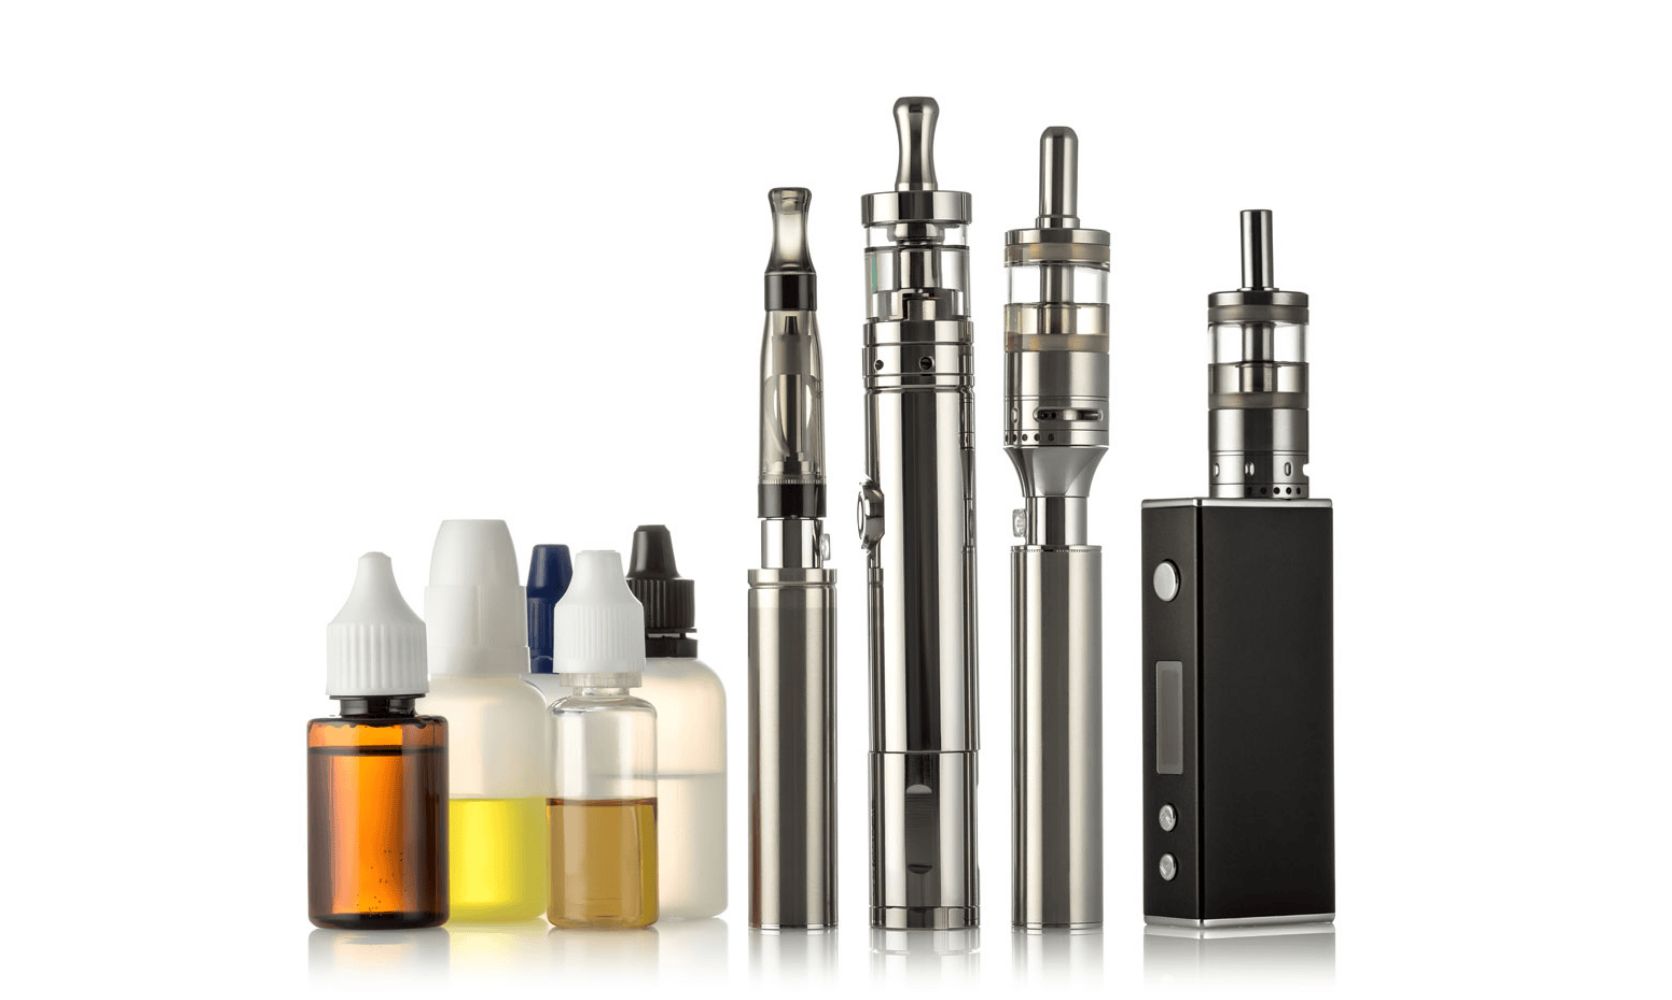 Explore the best vape pens in Canada, how to use them easily, which ones are worth buying, and where to shop online confidently. Read this guide!